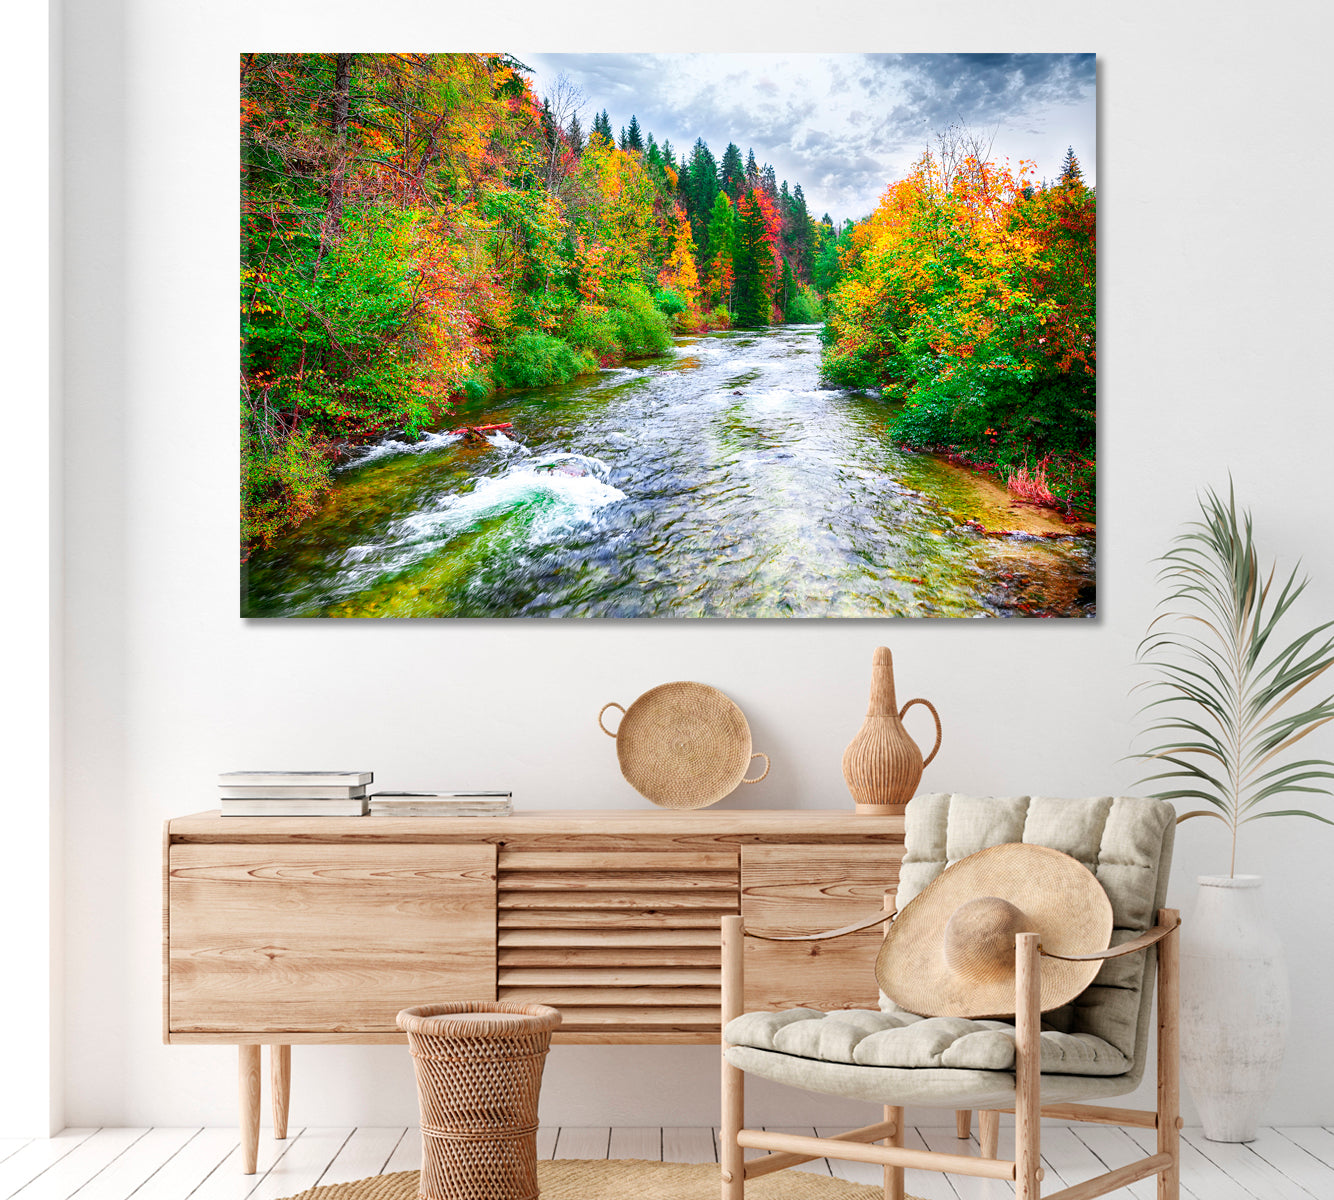 Autumn Forest in Austria Canvas Print ArtLexy 1 Panel 24"x16" inches 